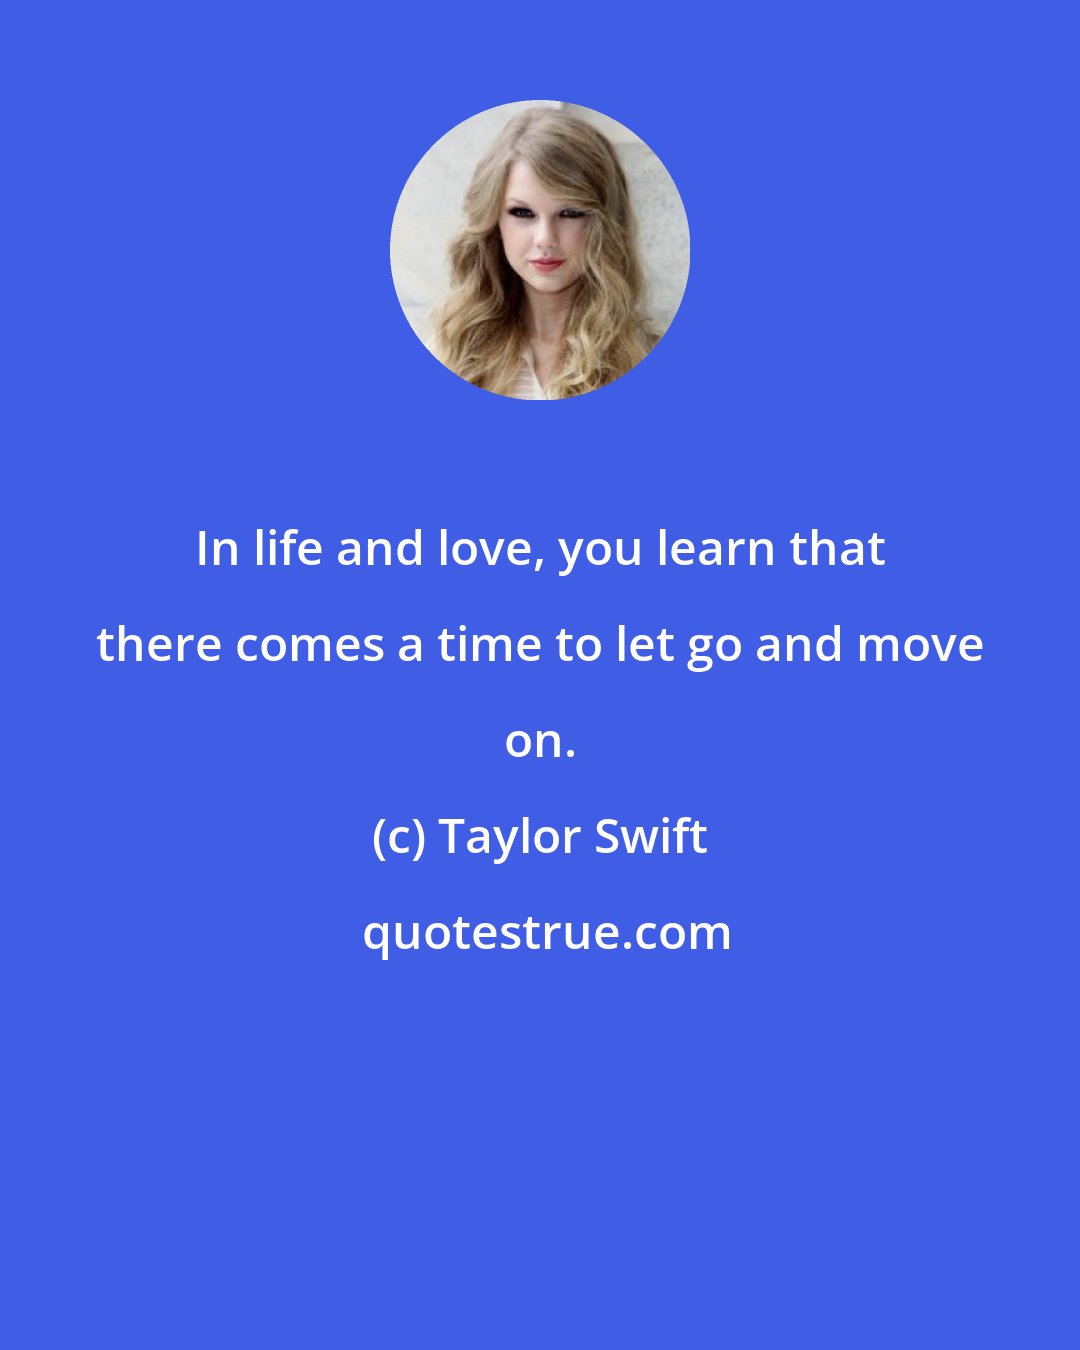 Taylor Swift: In life and love, you learn that there comes a time to let go and move on.